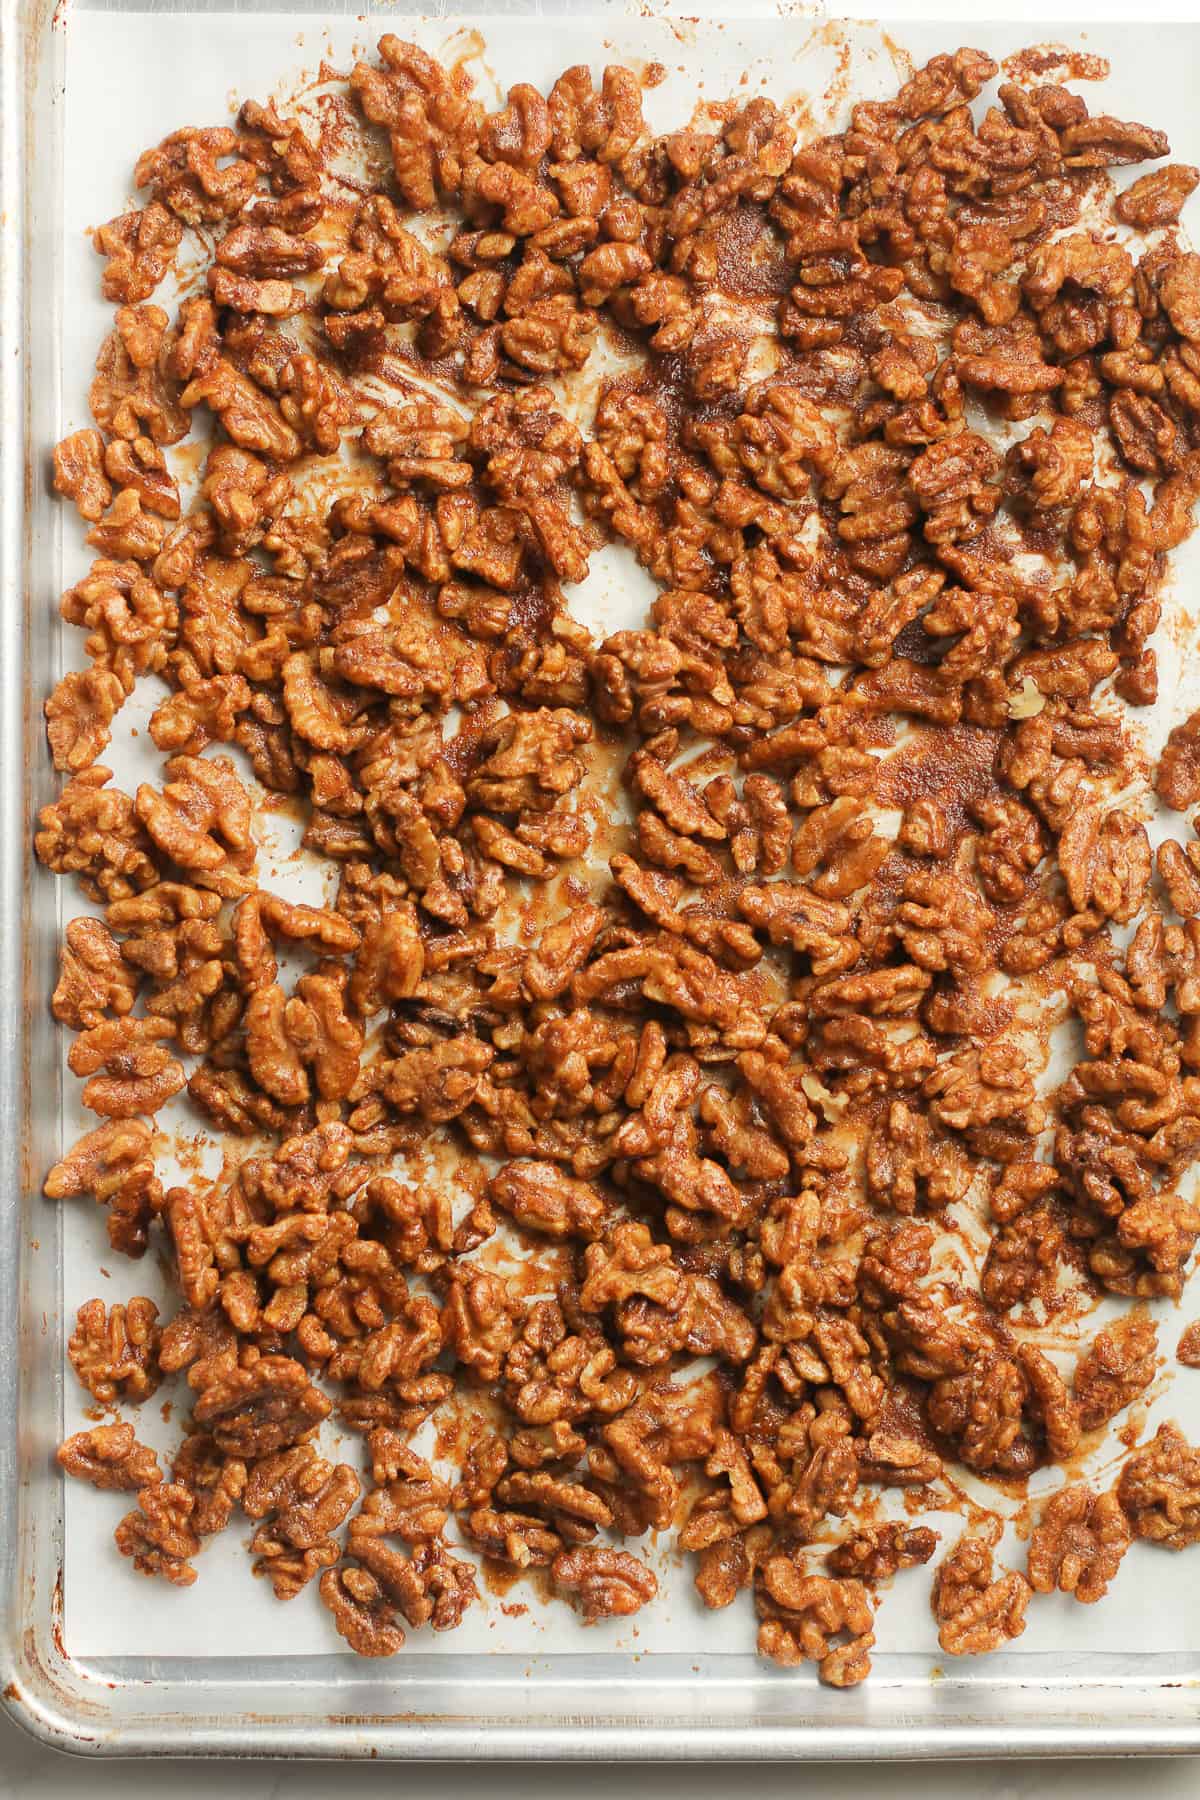 A baking sheet after baking the candied walnuts.